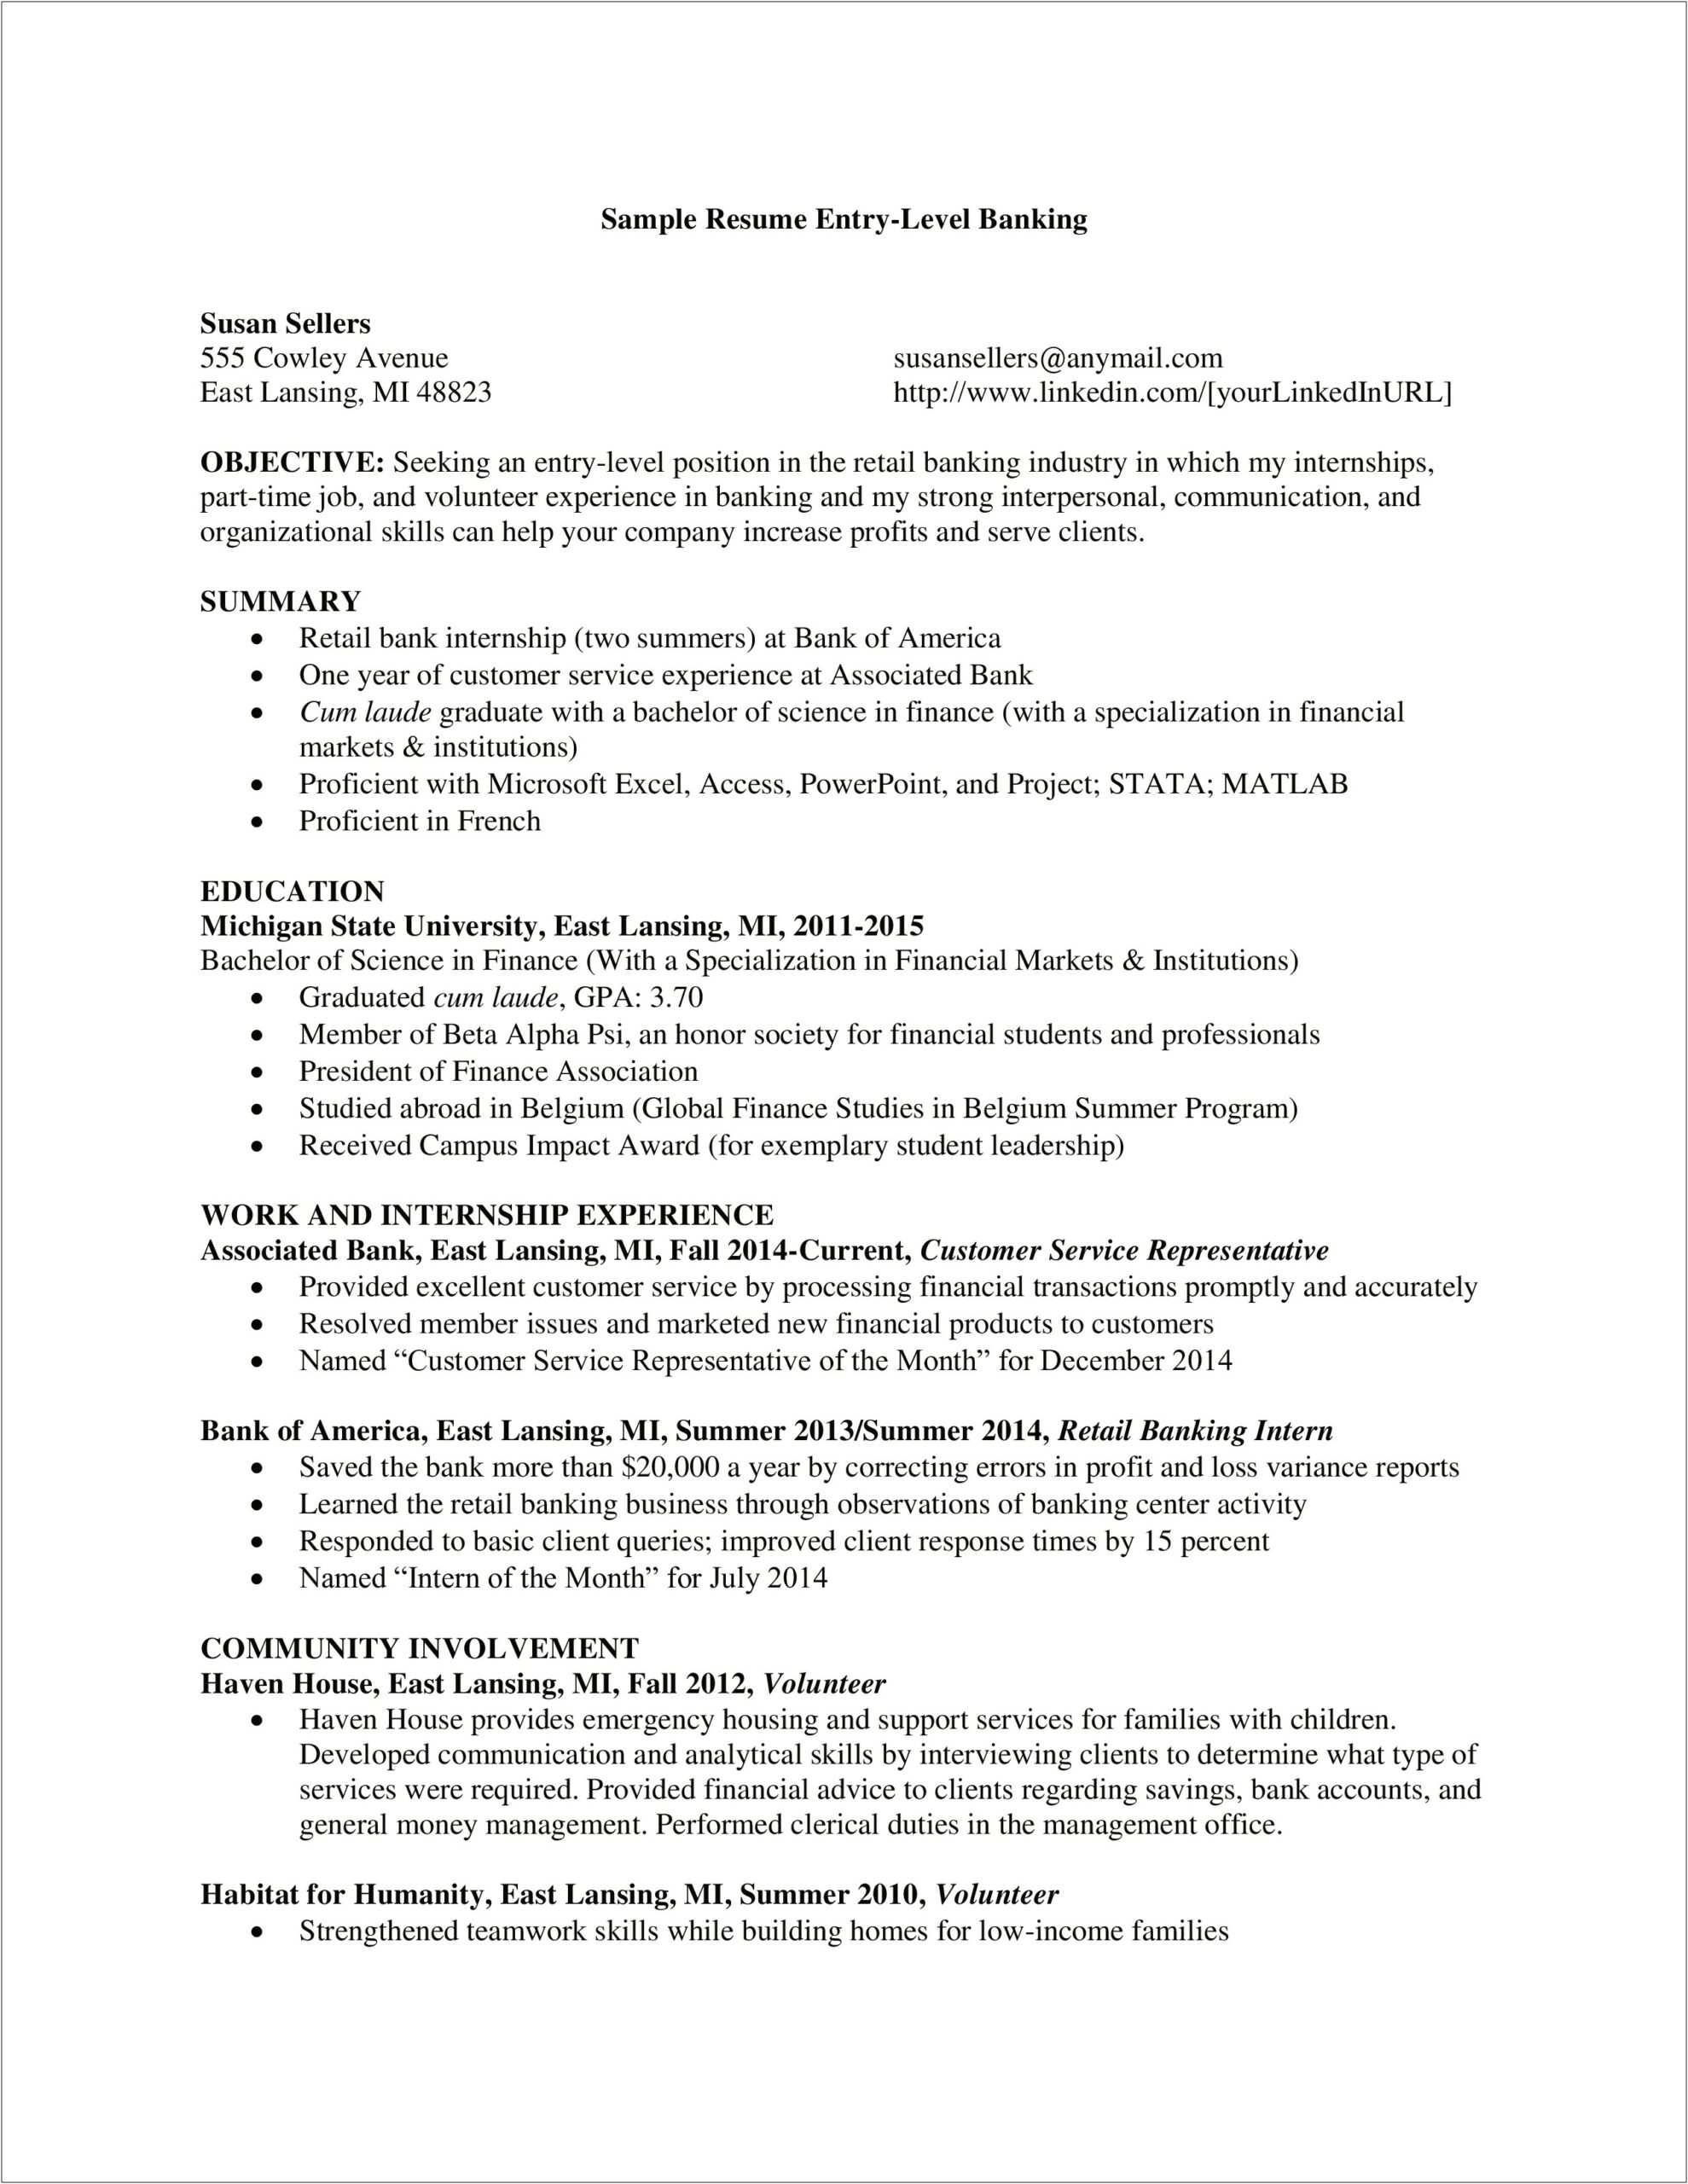 Summary For Resume It Entry Level